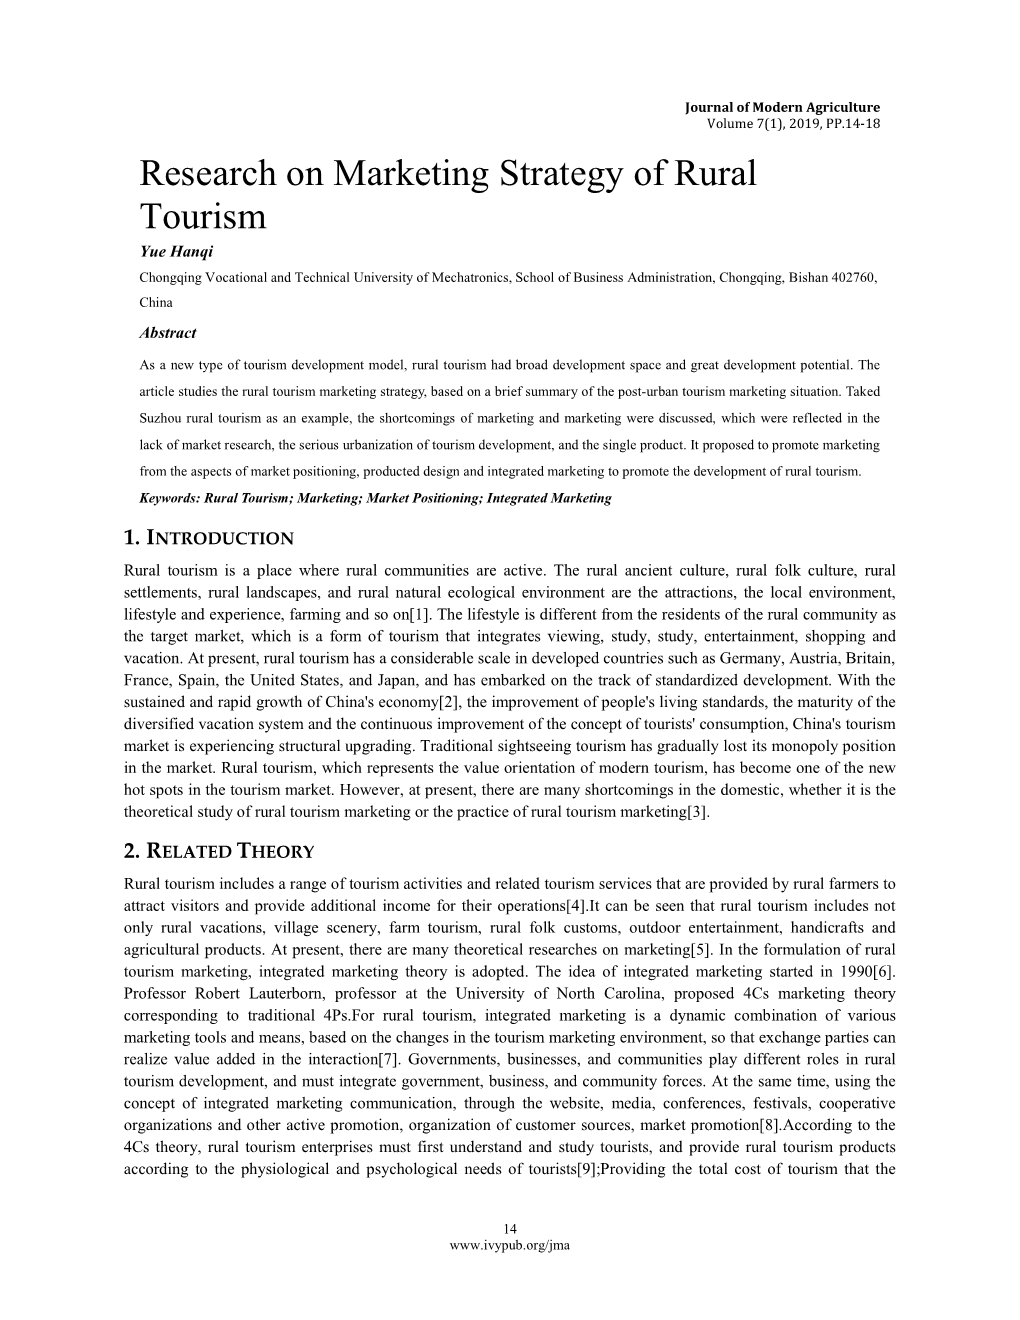 research papers on rural tourism